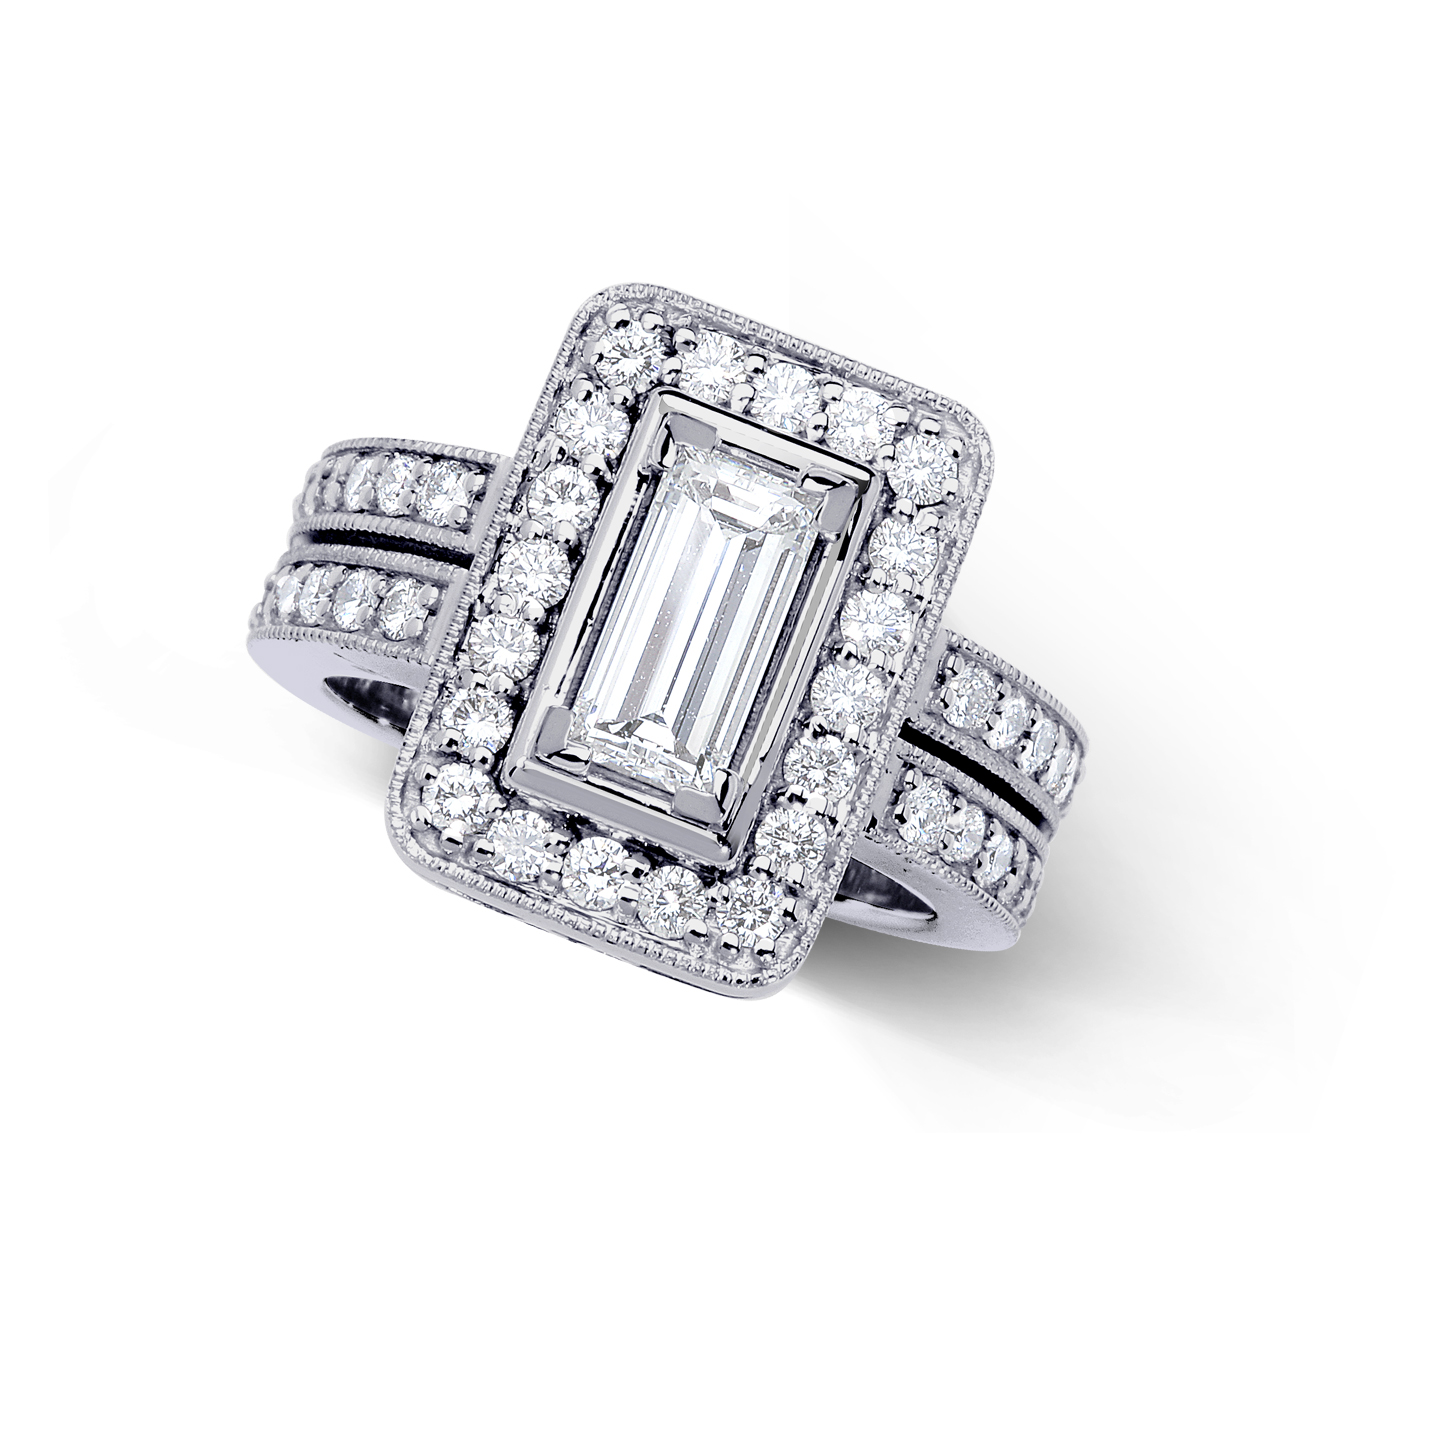 Fancies, Big Bands, and Color: The Latest Engagement Ring Trends - Rapaport